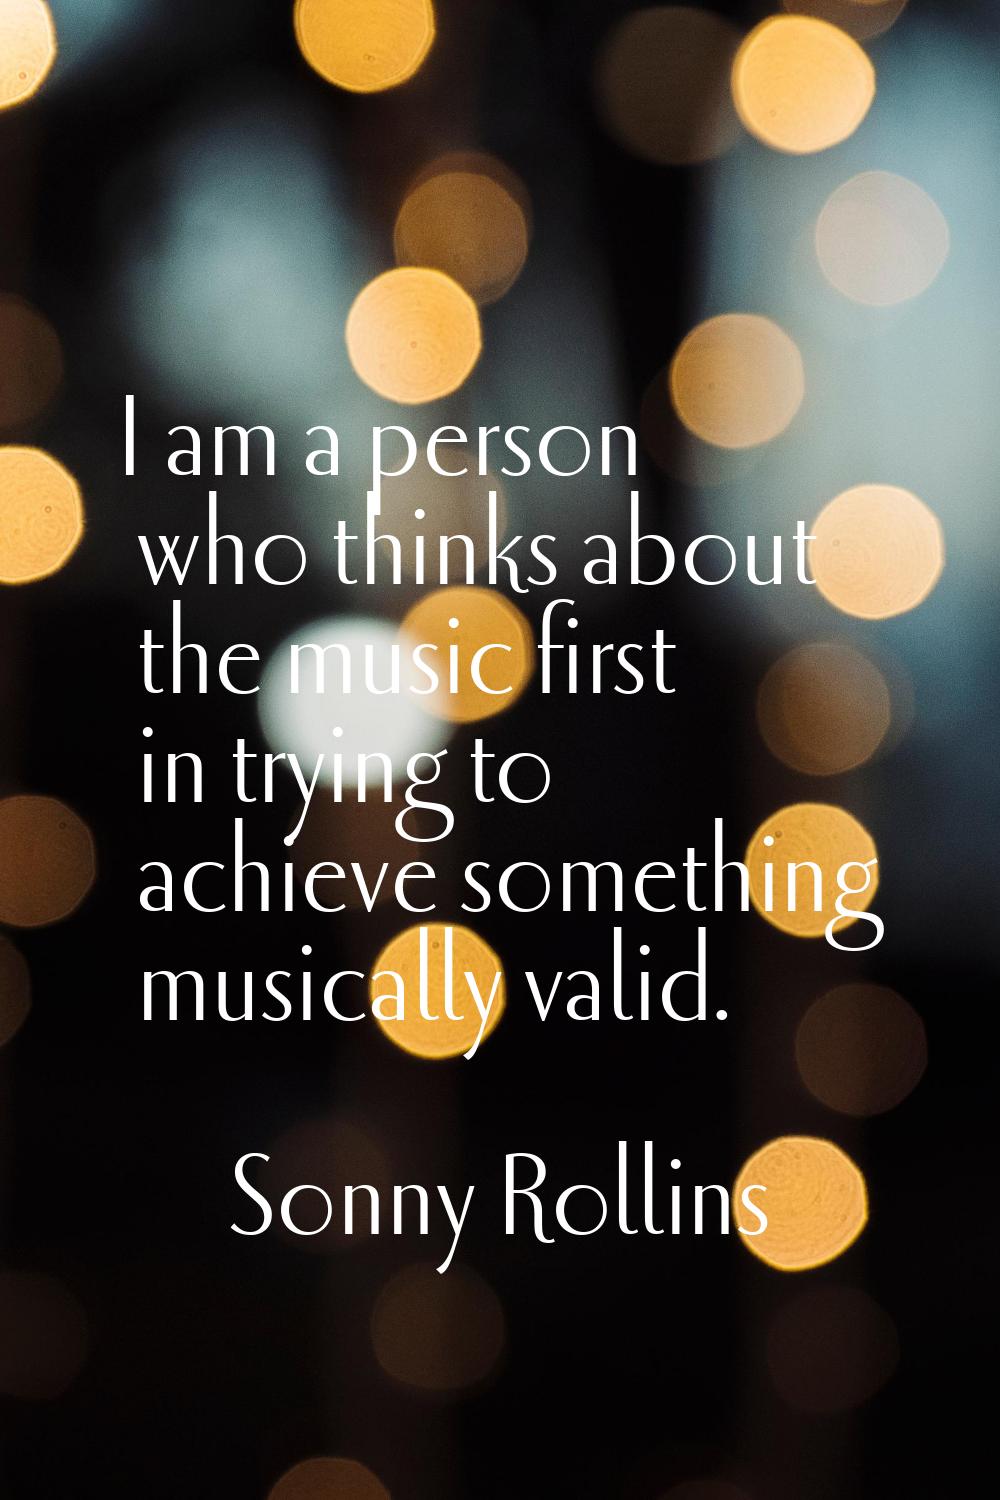 I am a person who thinks about the music first in trying to achieve something musically valid.